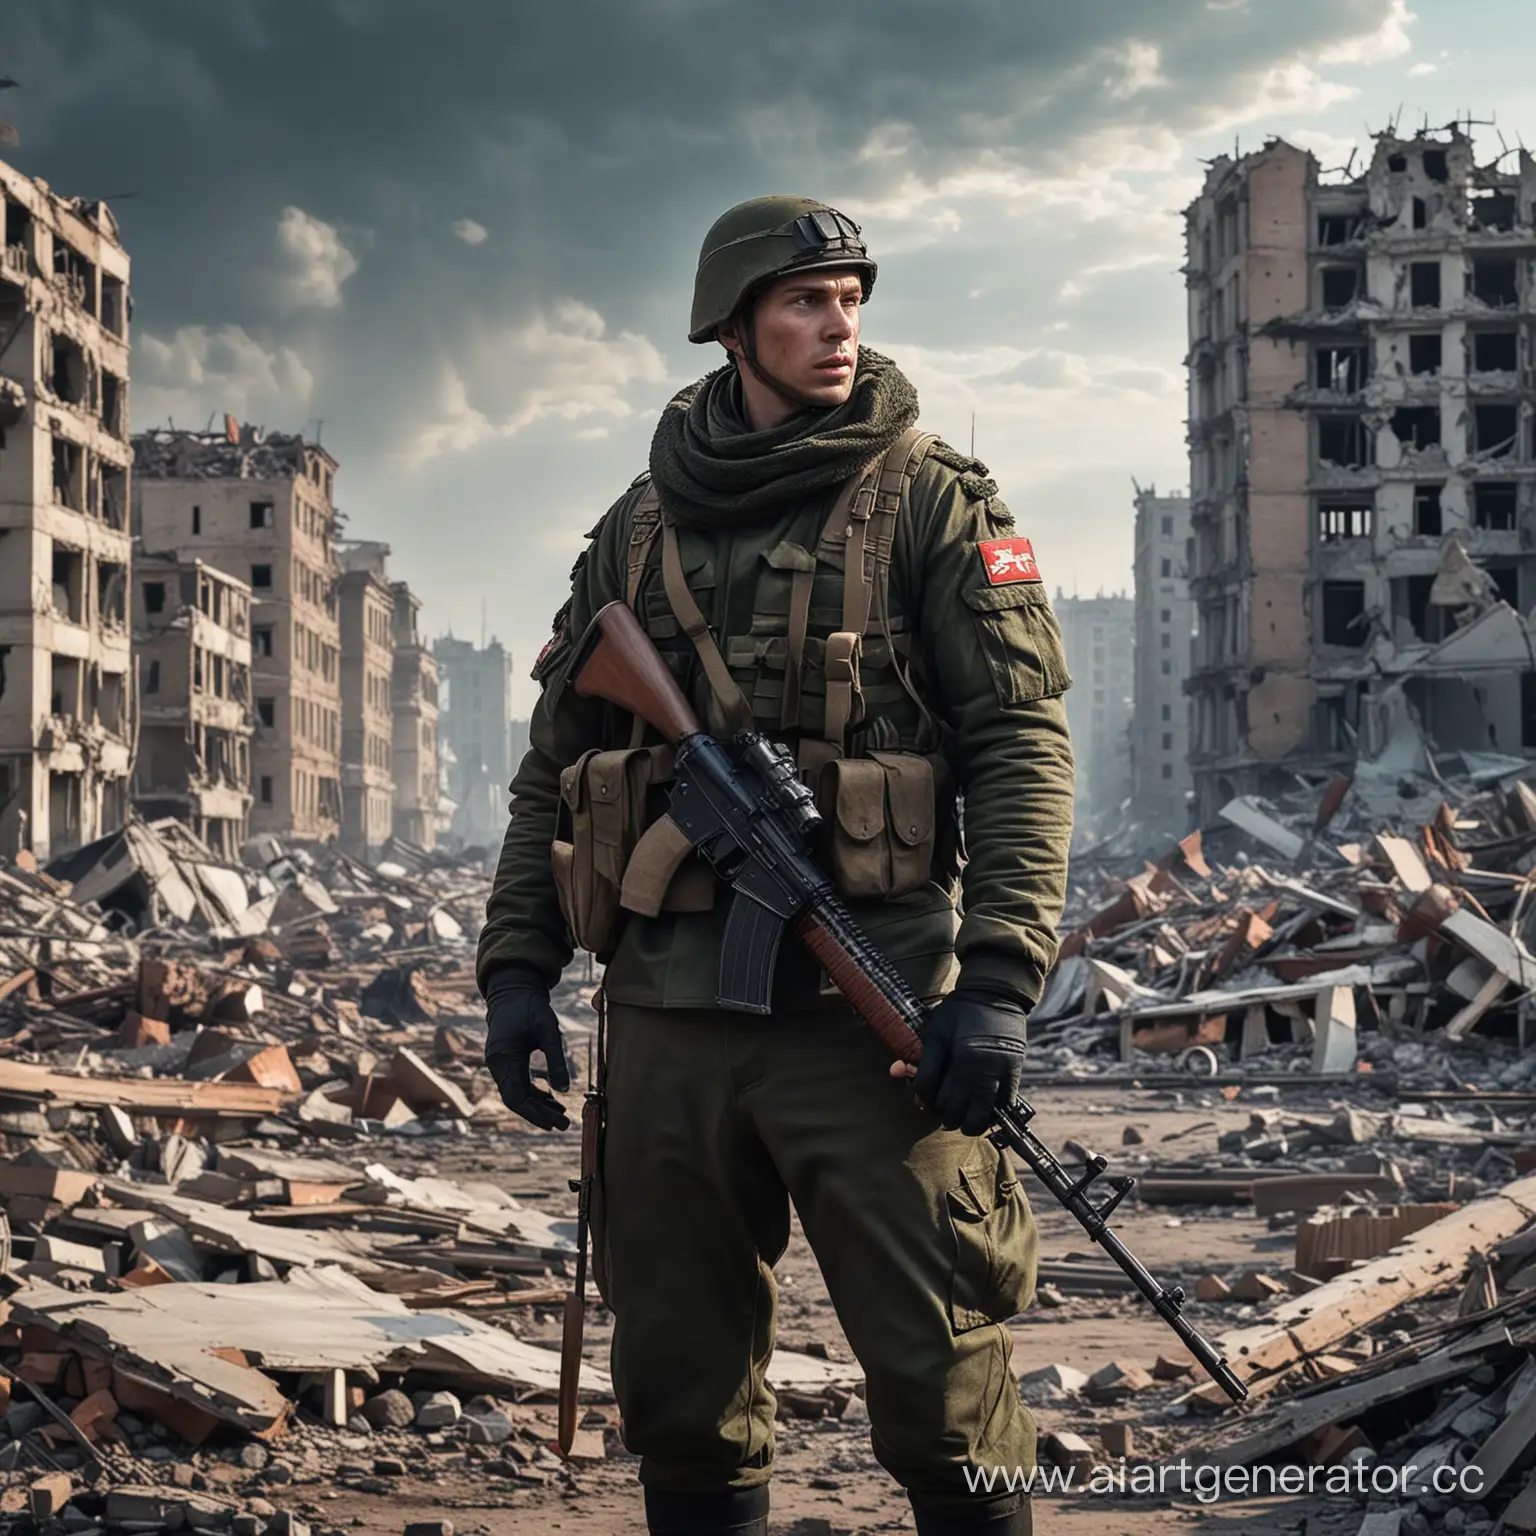 Russian-Soldier-Amidst-Ruins-of-Devastated-City